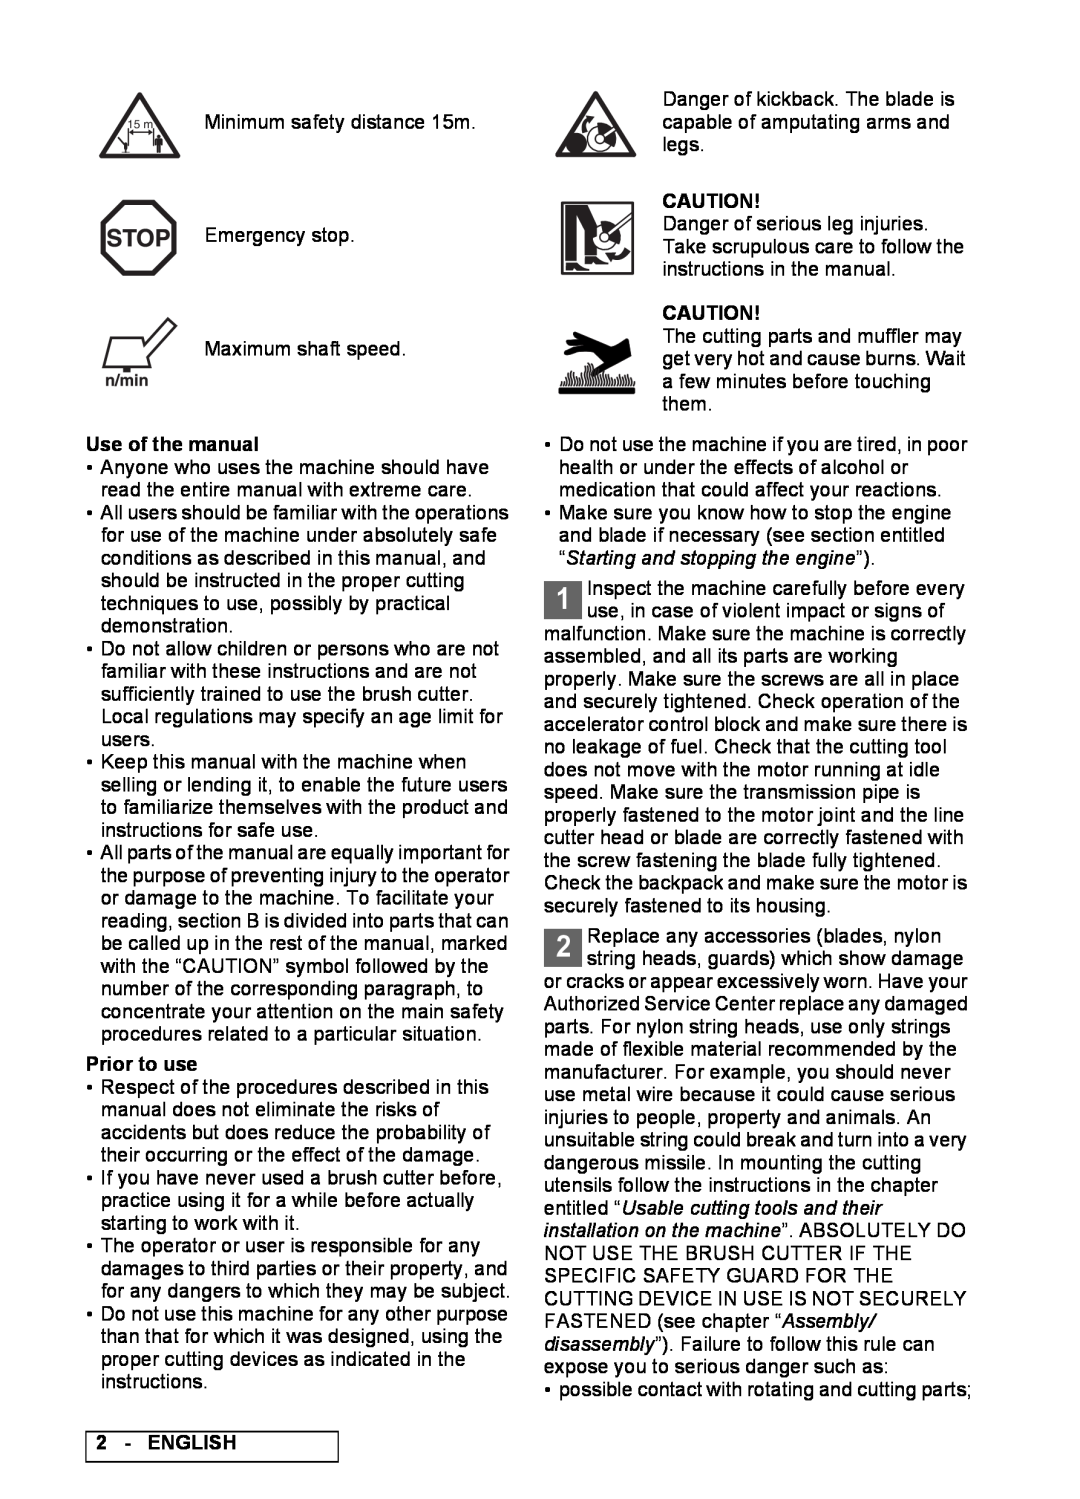 Electrolux 95390039400, 52 BP PRO, 95390039300, 4630X BP, 95390052100, 4230X BP Use of the manual, Prior to use, English 